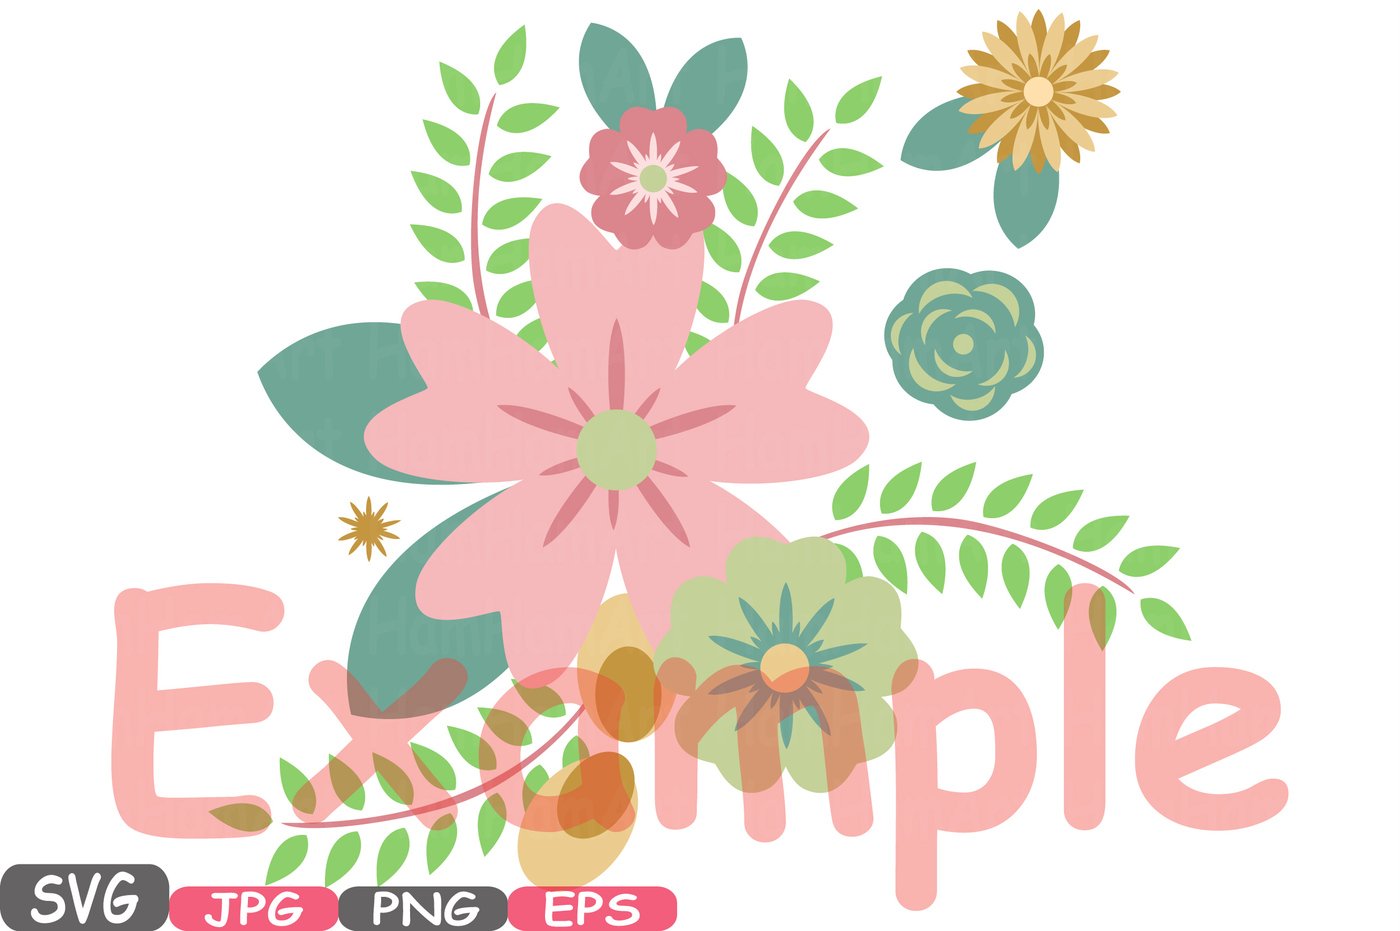 Wedding Flowers Vintage Floral Invitation Cutting Files Svg Eps Png Jpg Party Colorful Clip Art Vector Graphics Clipart  16Sv By Hamhamart | Thehungryjpeg. Hdpng.com  - Flower Jpg, Transparent background PNG HD thumbnail